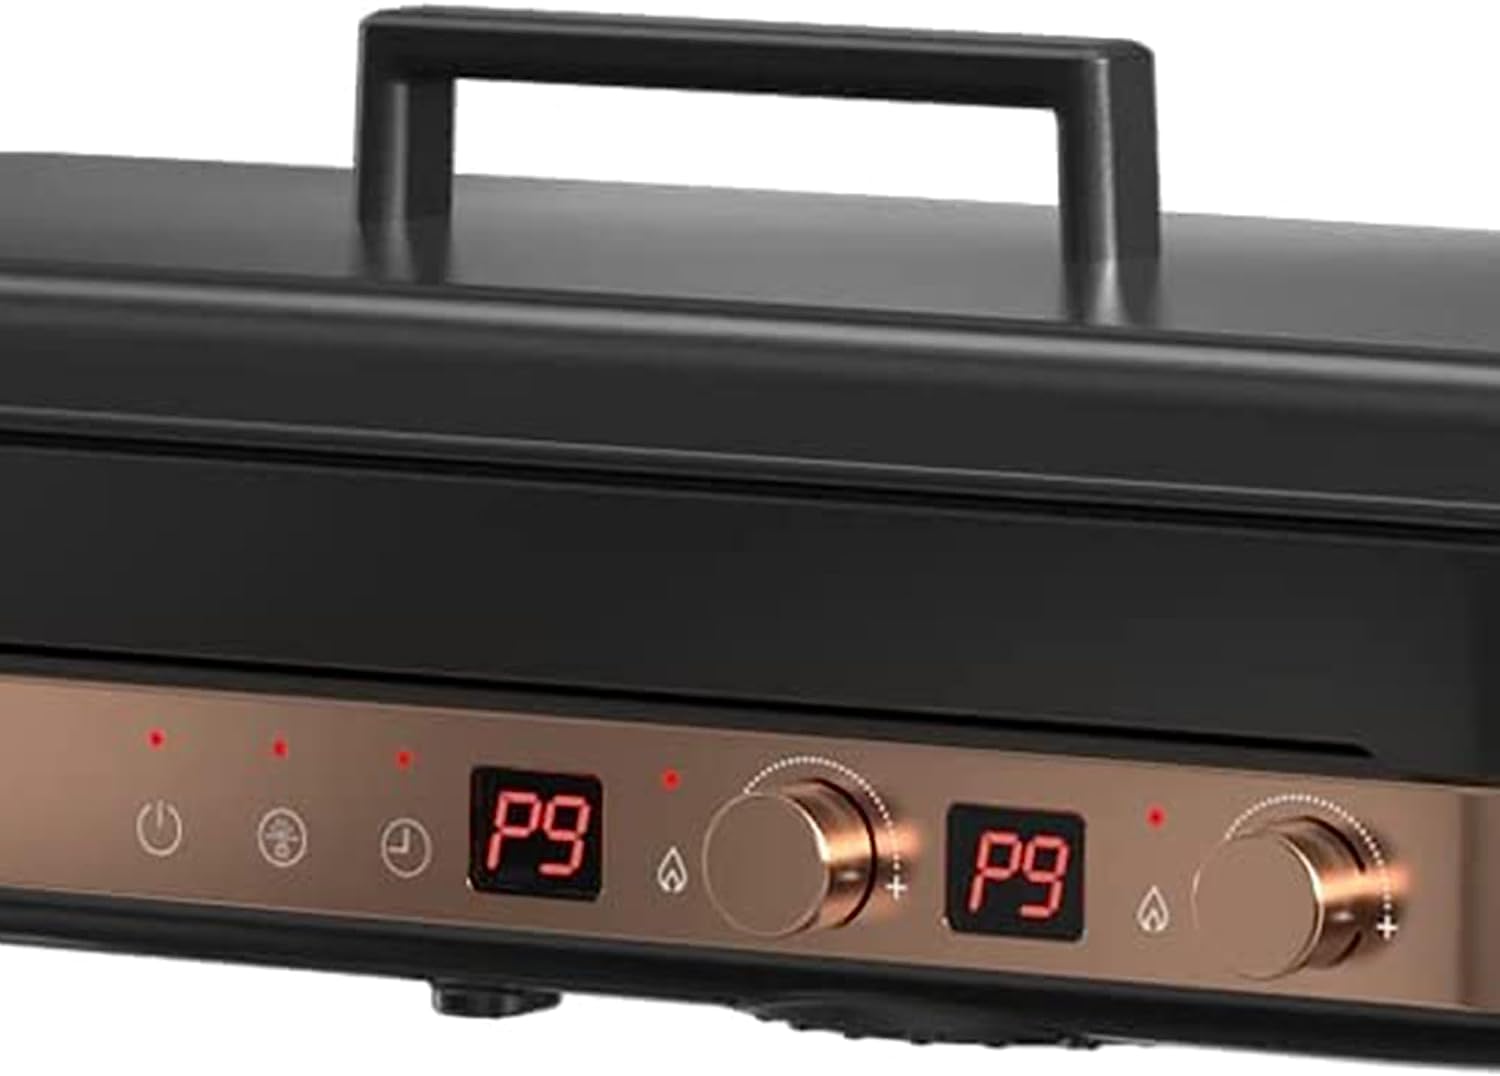 https://bigbigmart.com/wp-content/uploads/2023/07/COOKTRON-Portable-Compact-2-Burner-Induction-Cooktop-Electric-Stove-w-Smokeless-Cast-Iron-Griddle-Grill-Temperature-Control-Child-Lock-Rose-Gold1.jpg